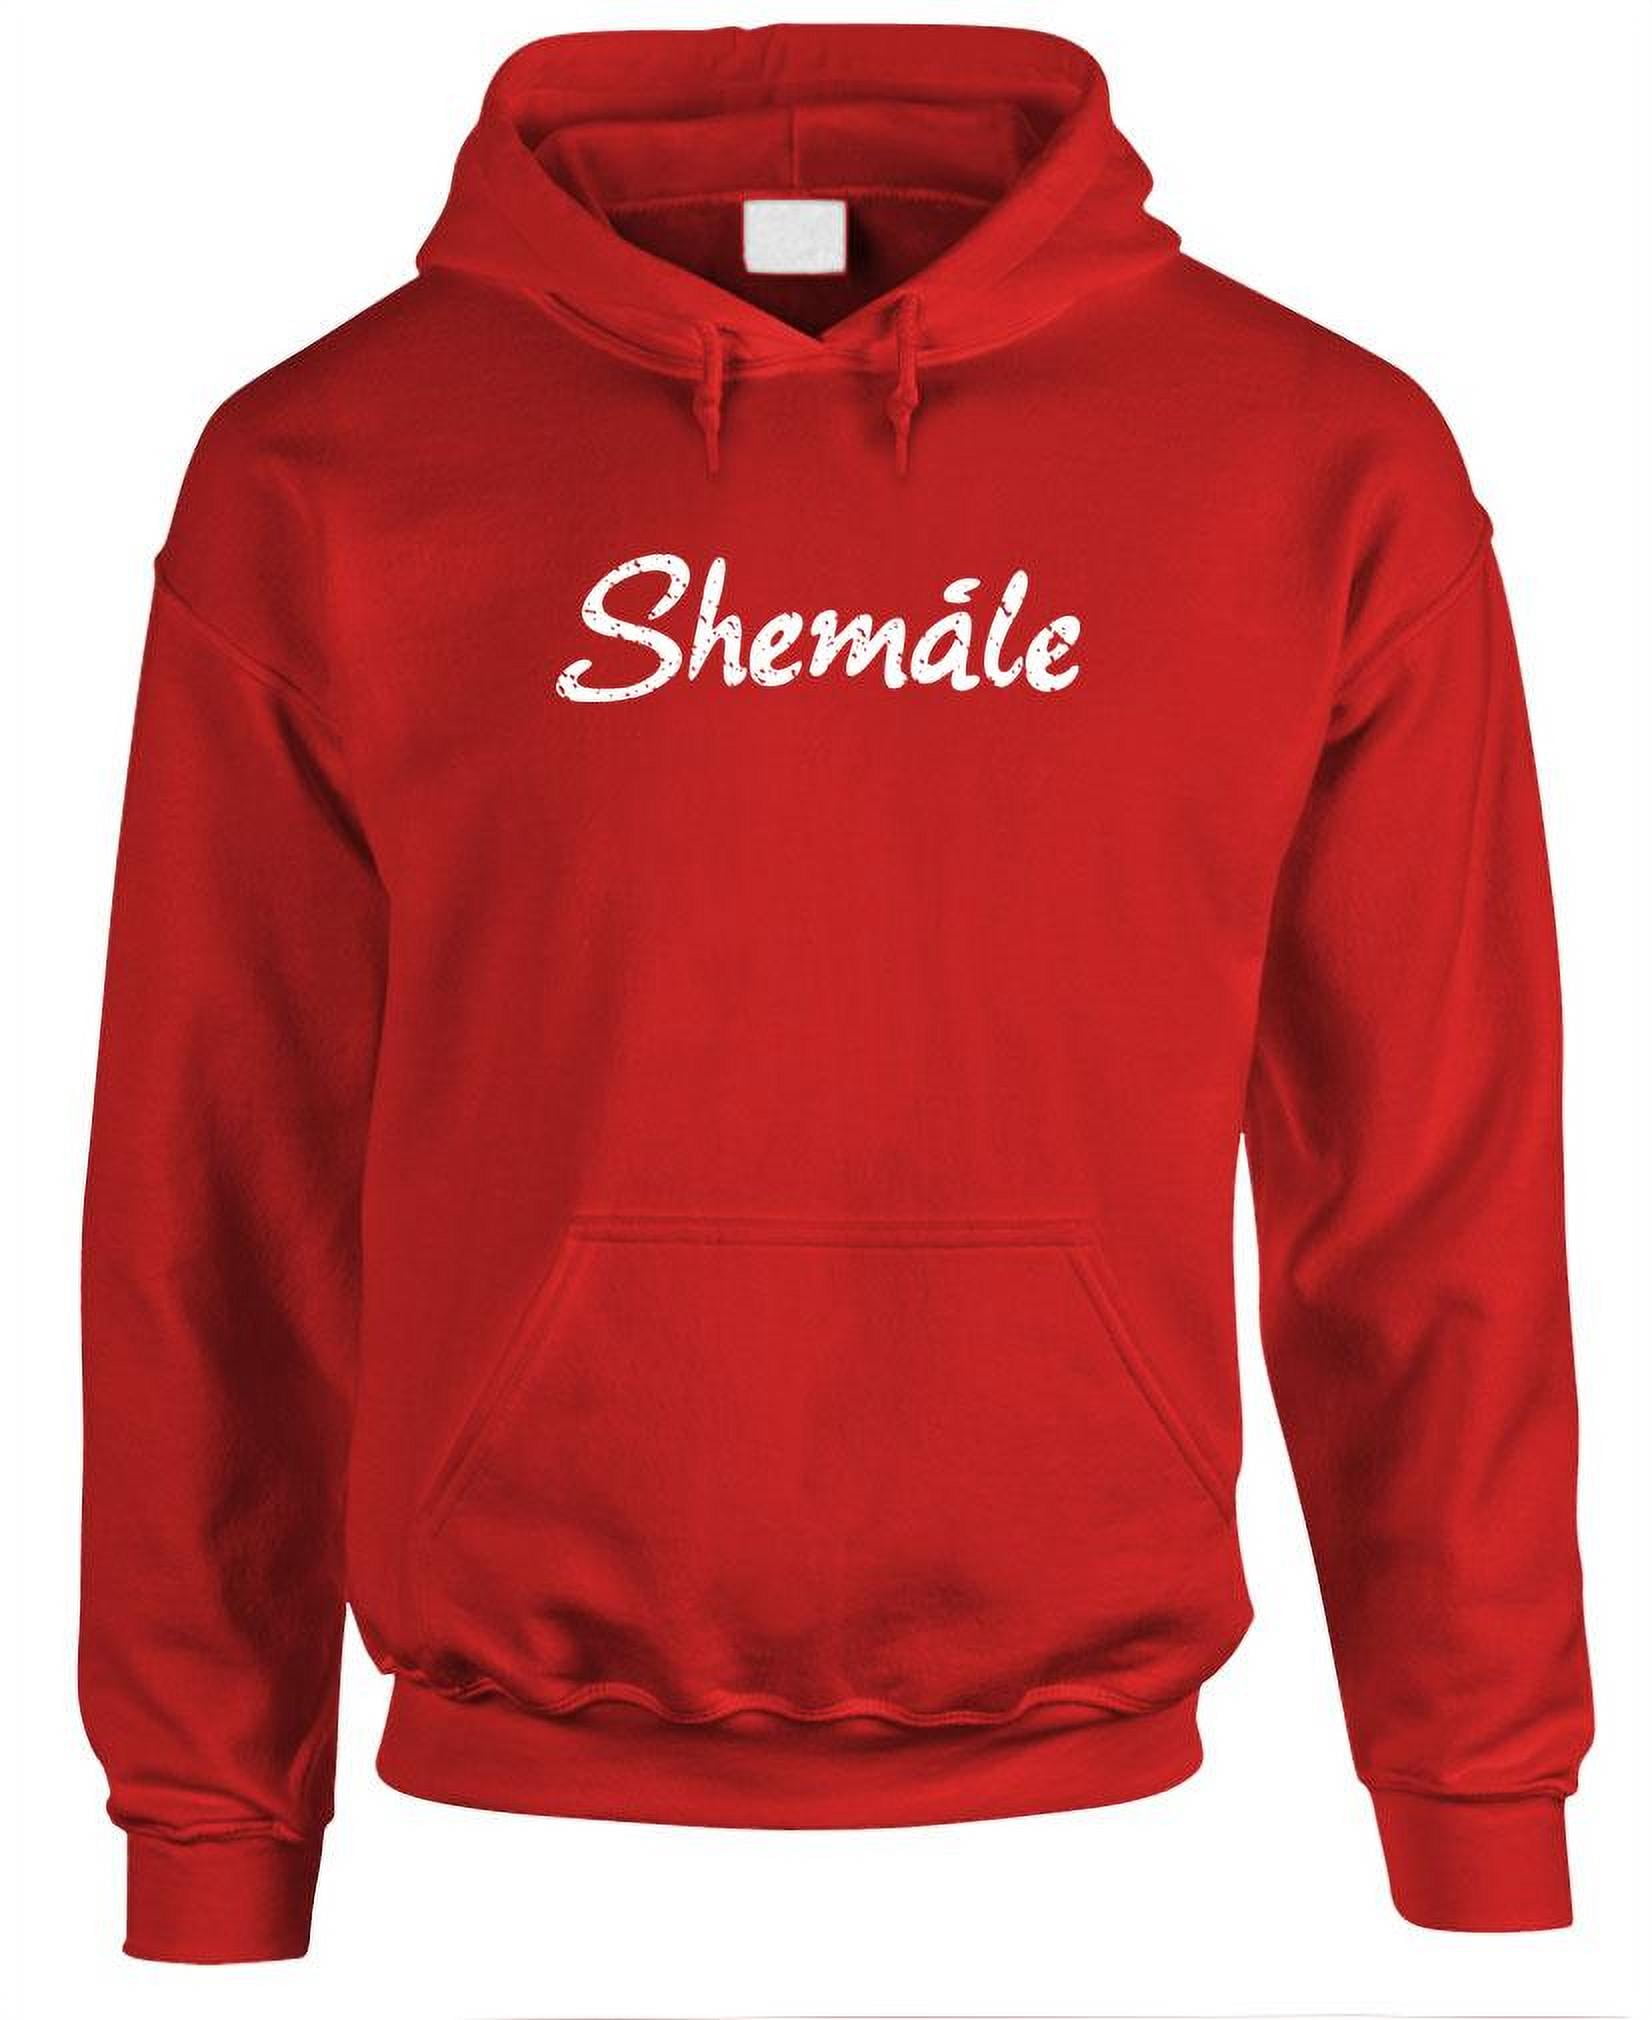 Shemale Red